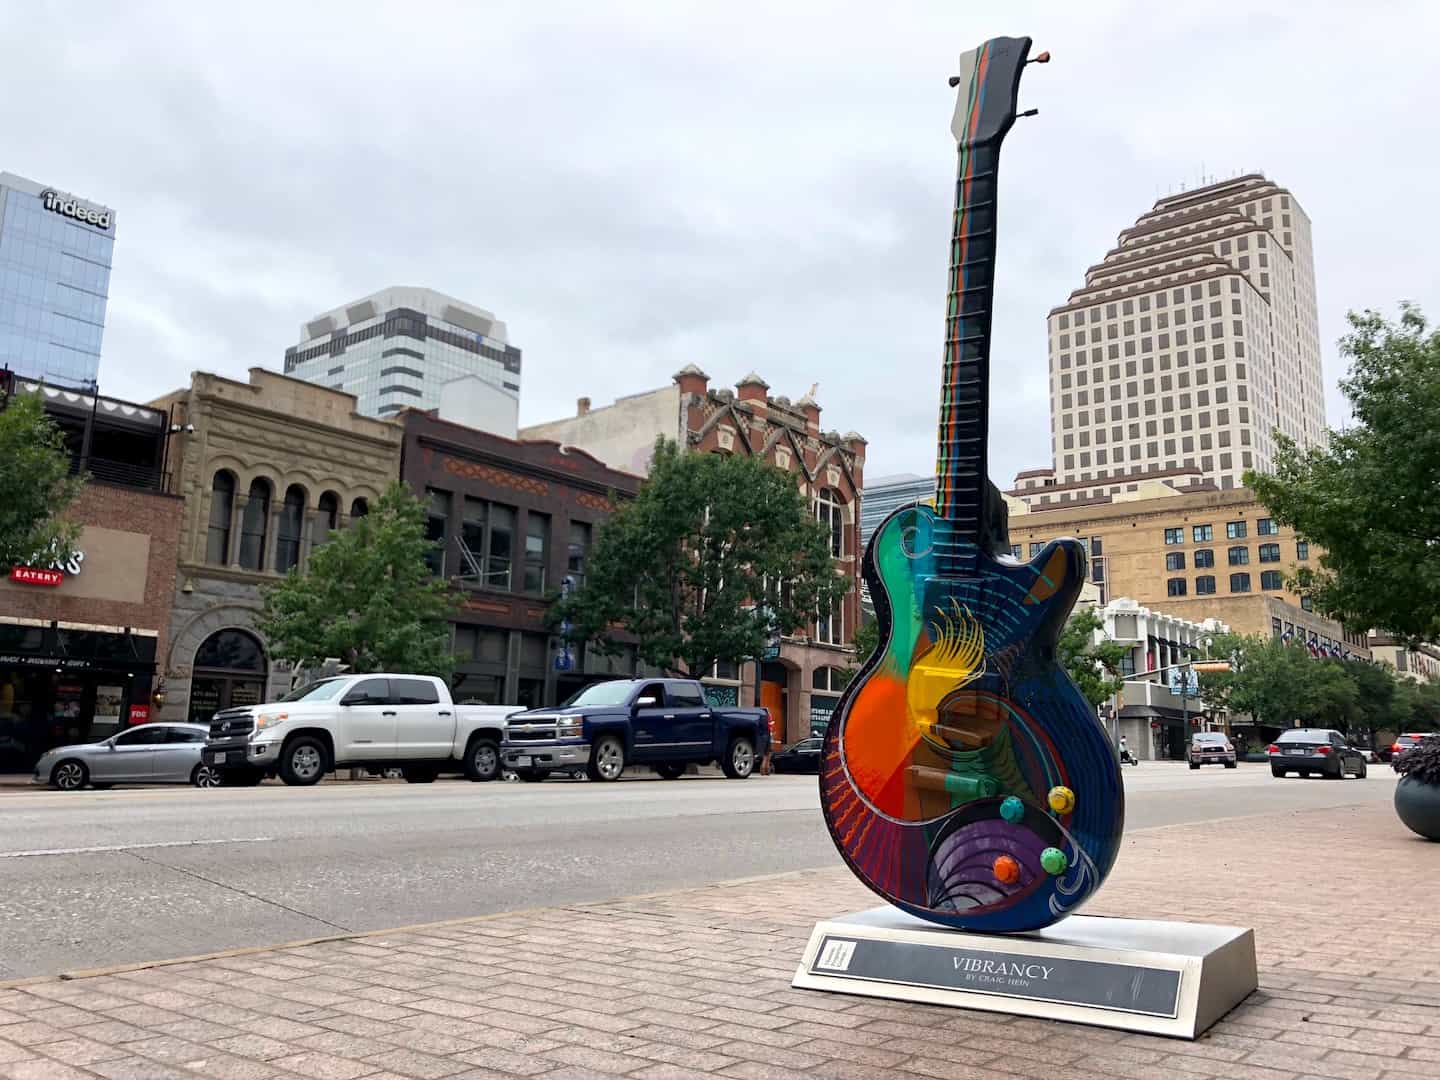 There are plenty of reasons to love Austin (including the amazing music scene in Austin!). Read on for more features that make this laid-back city great for Texas travel! To & Fro Fam